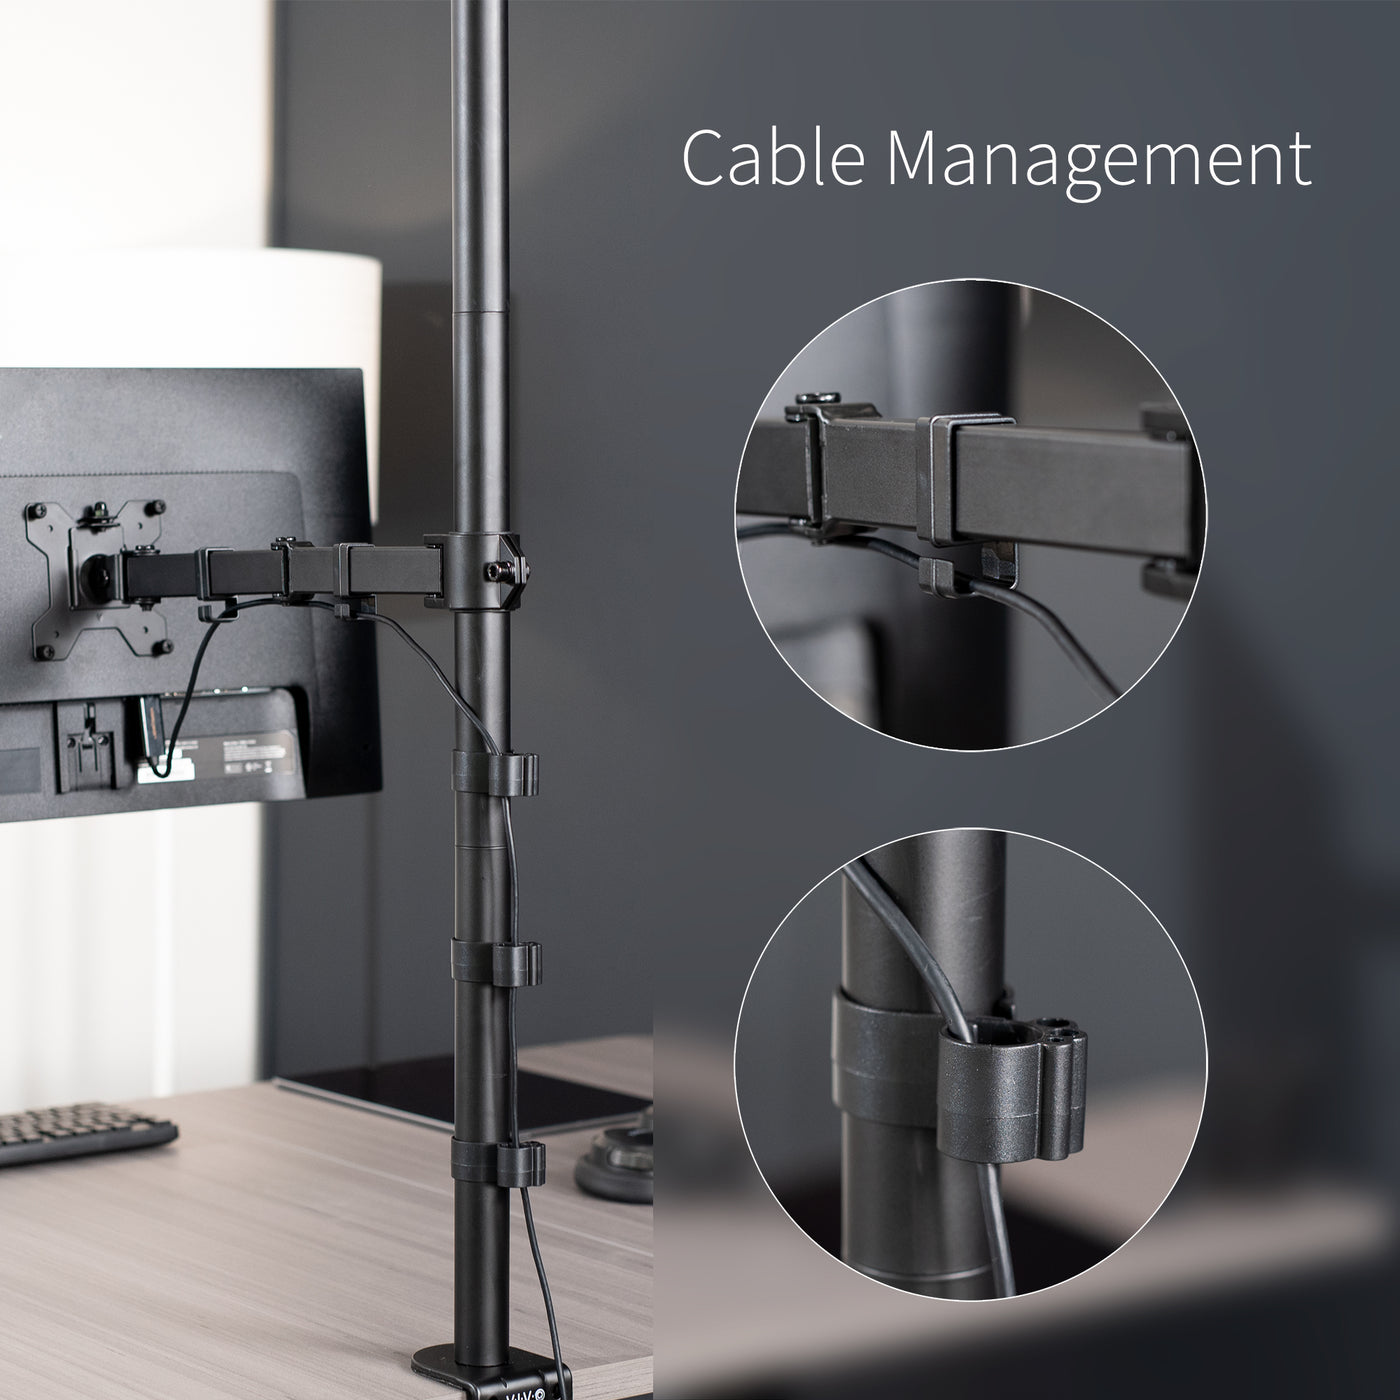 Extra tall desk mount for single monitor provides sit or stand application for the user with integrated cable management clips.